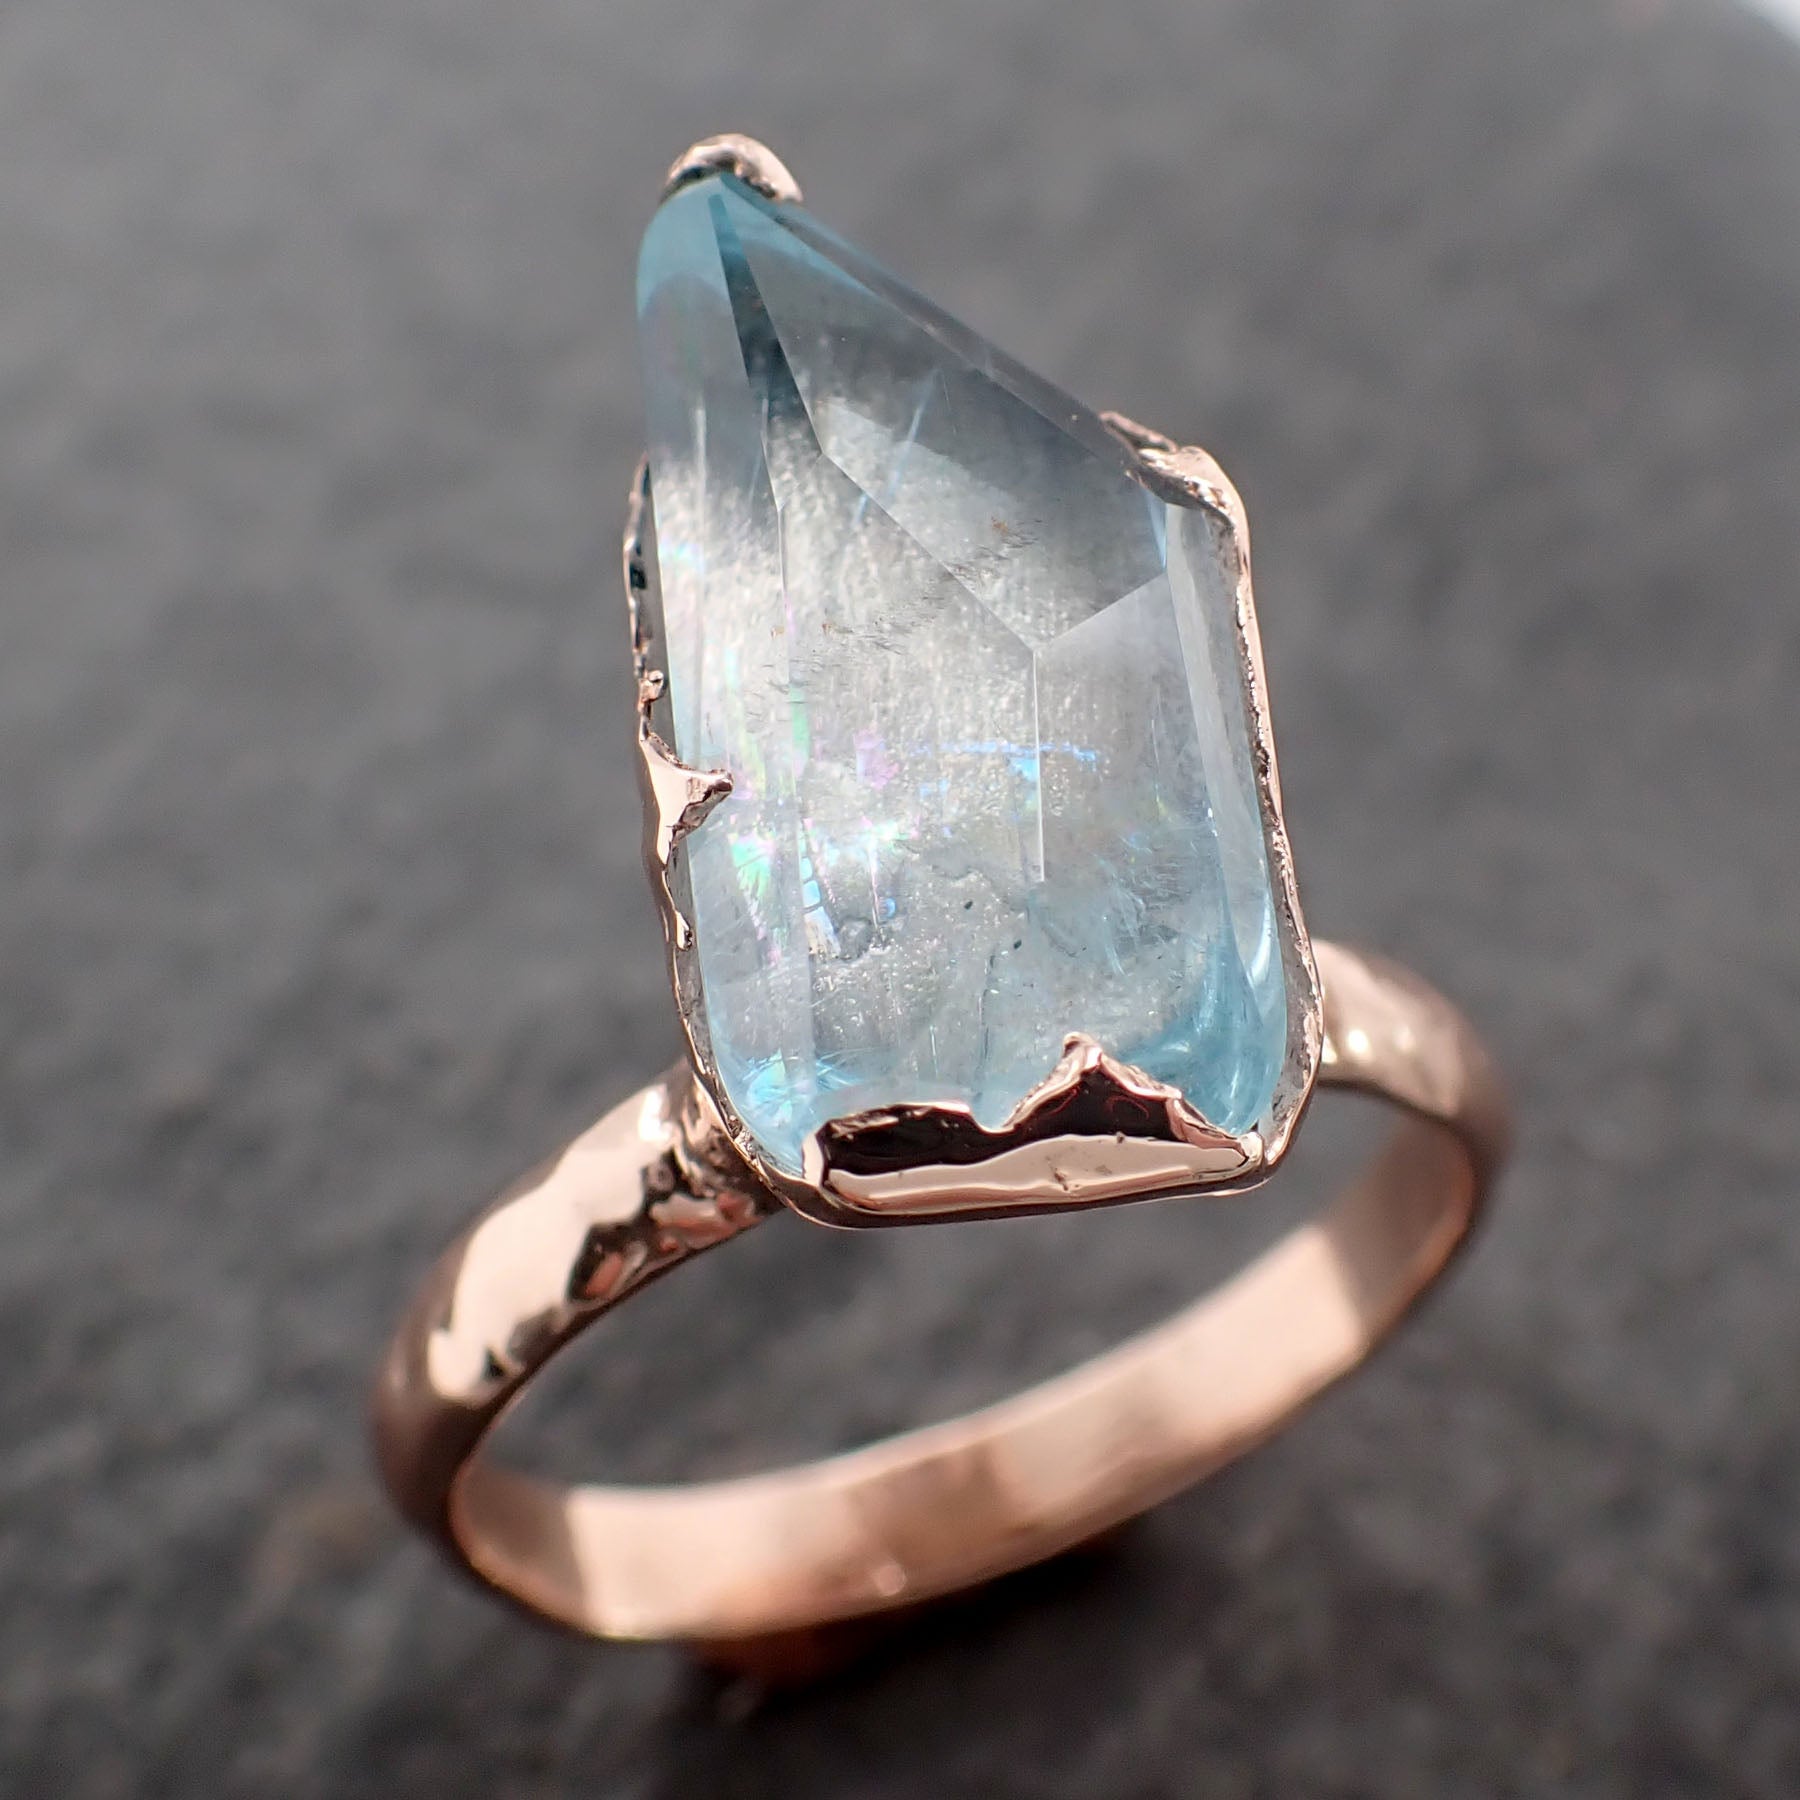 Partially faceted Aquamarine Solitaire Ring 14k Rose gold Custom One Of a Kind Gemstone Ring Bespoke byAngeline 2686